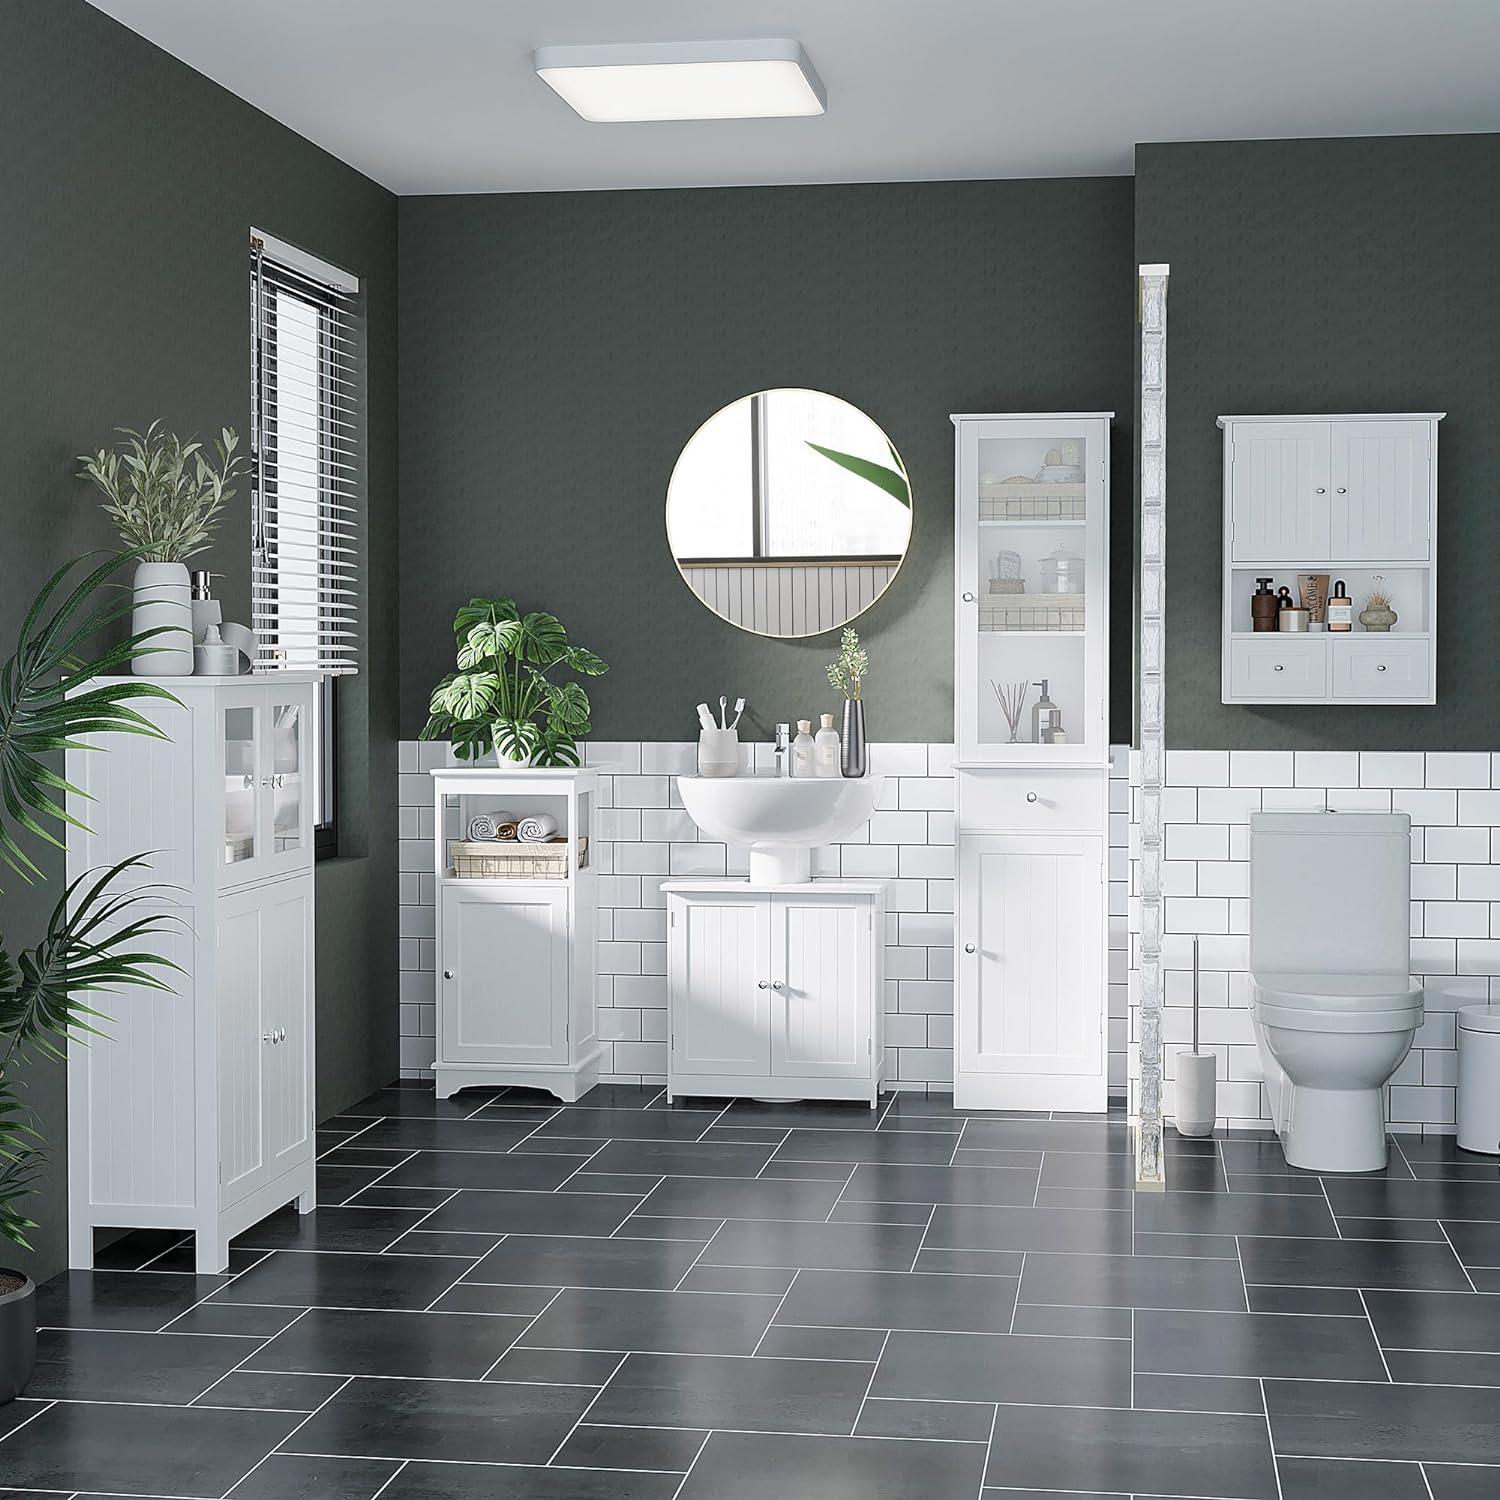 Sleek and Modern Bathroom Wall Cabinet with Ample Storage Space - Furniture4Design